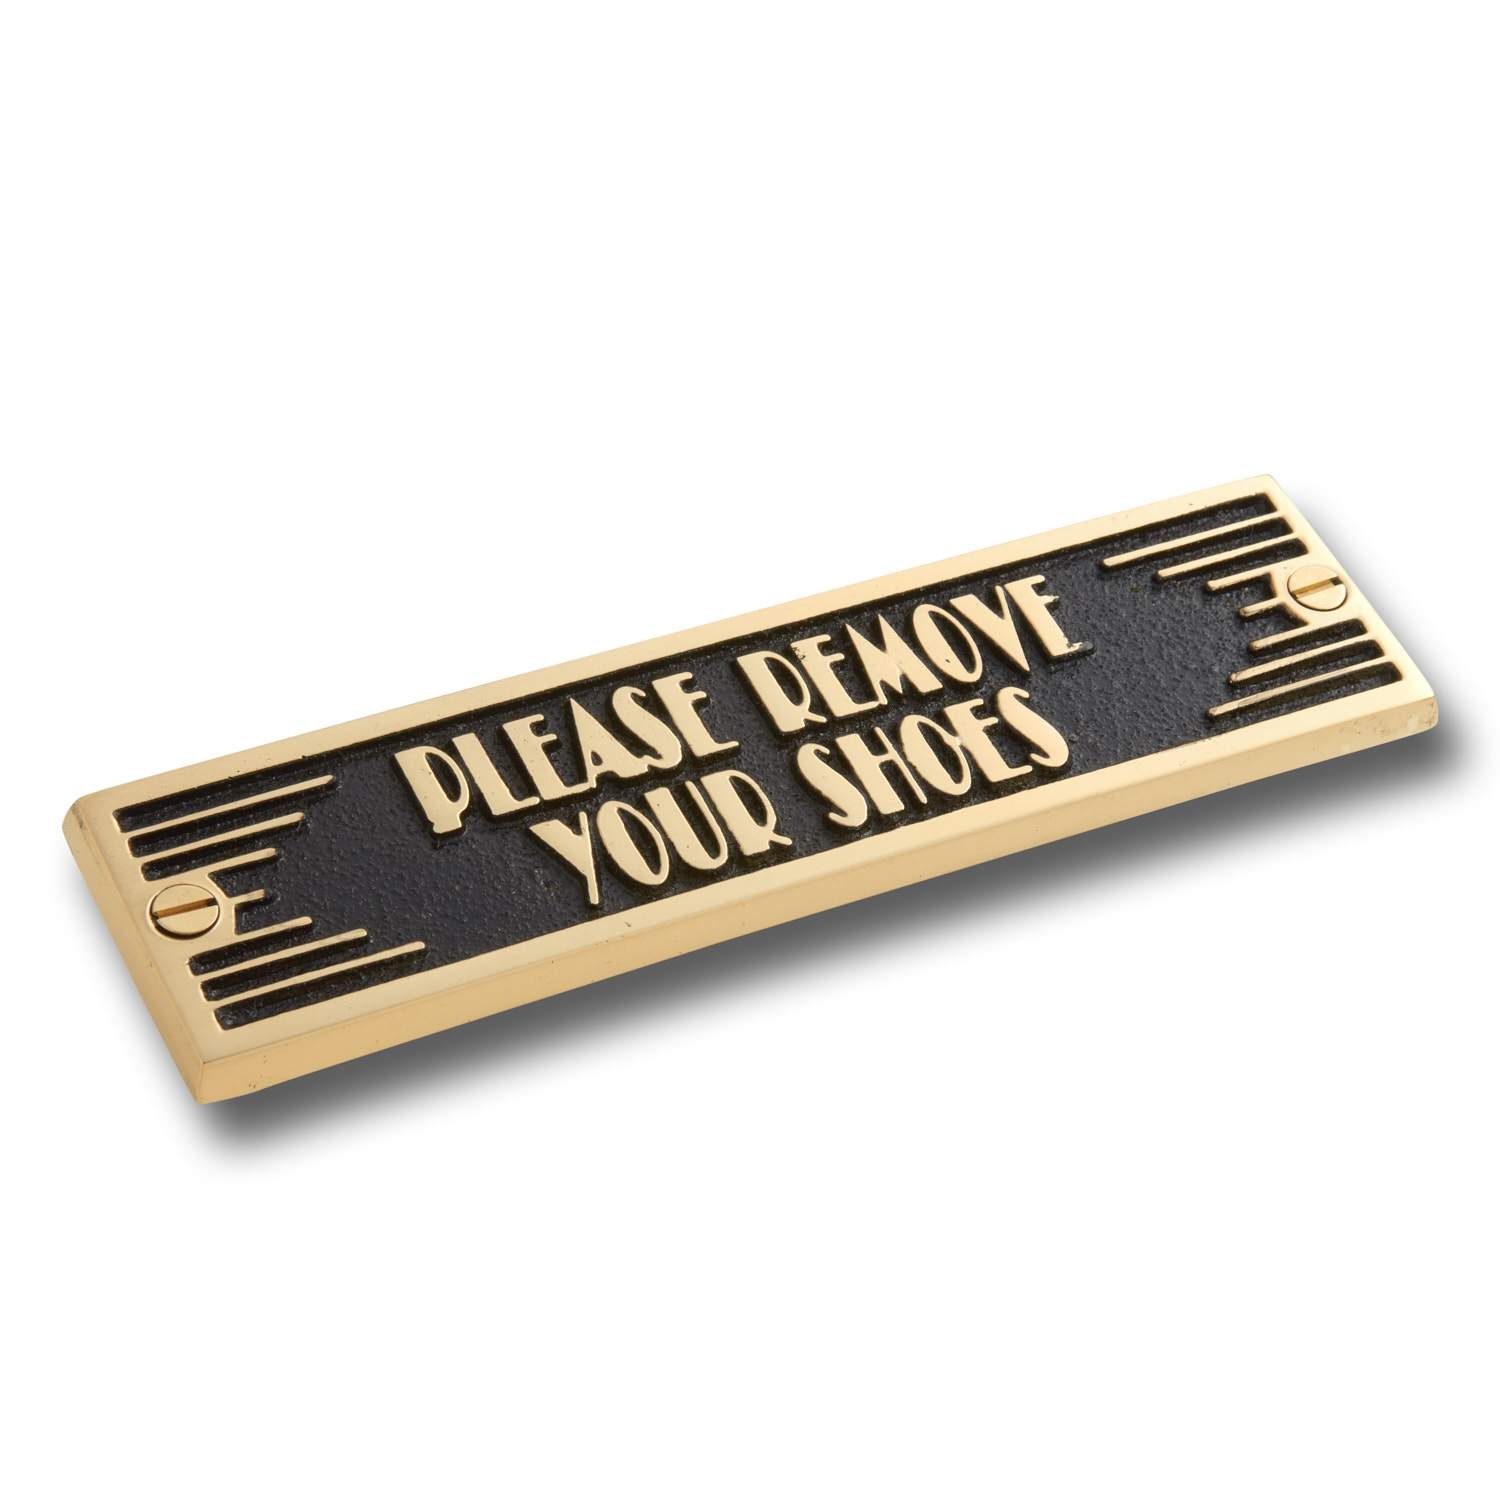 Please Remove Your Shoes Metal Door Sign.  Art Deco Style Home Décor Wall Plaque Accessories – Please Remove Your Shoes Aluminium